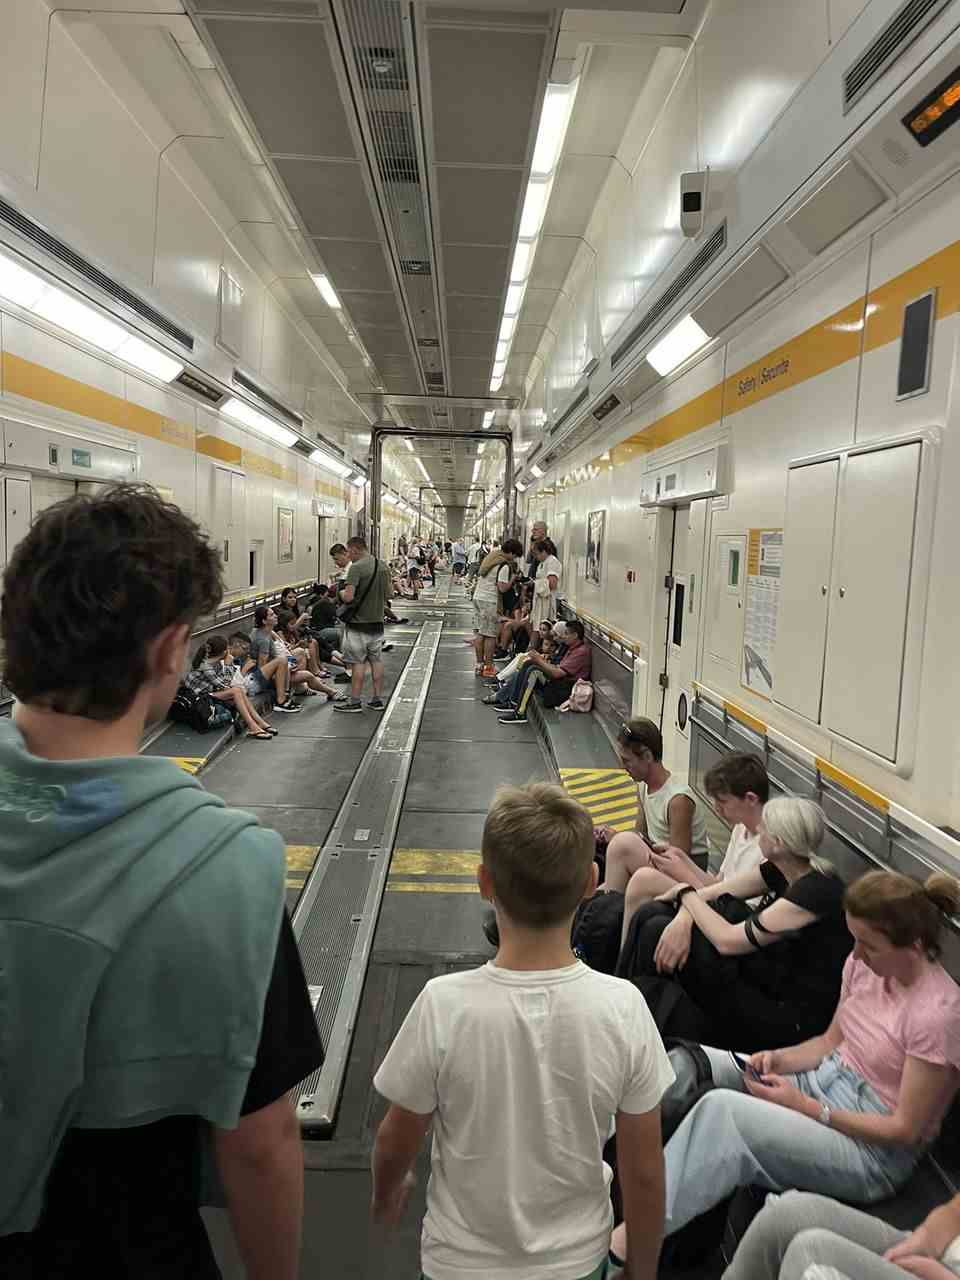 Passengers had to wait several hours on the train